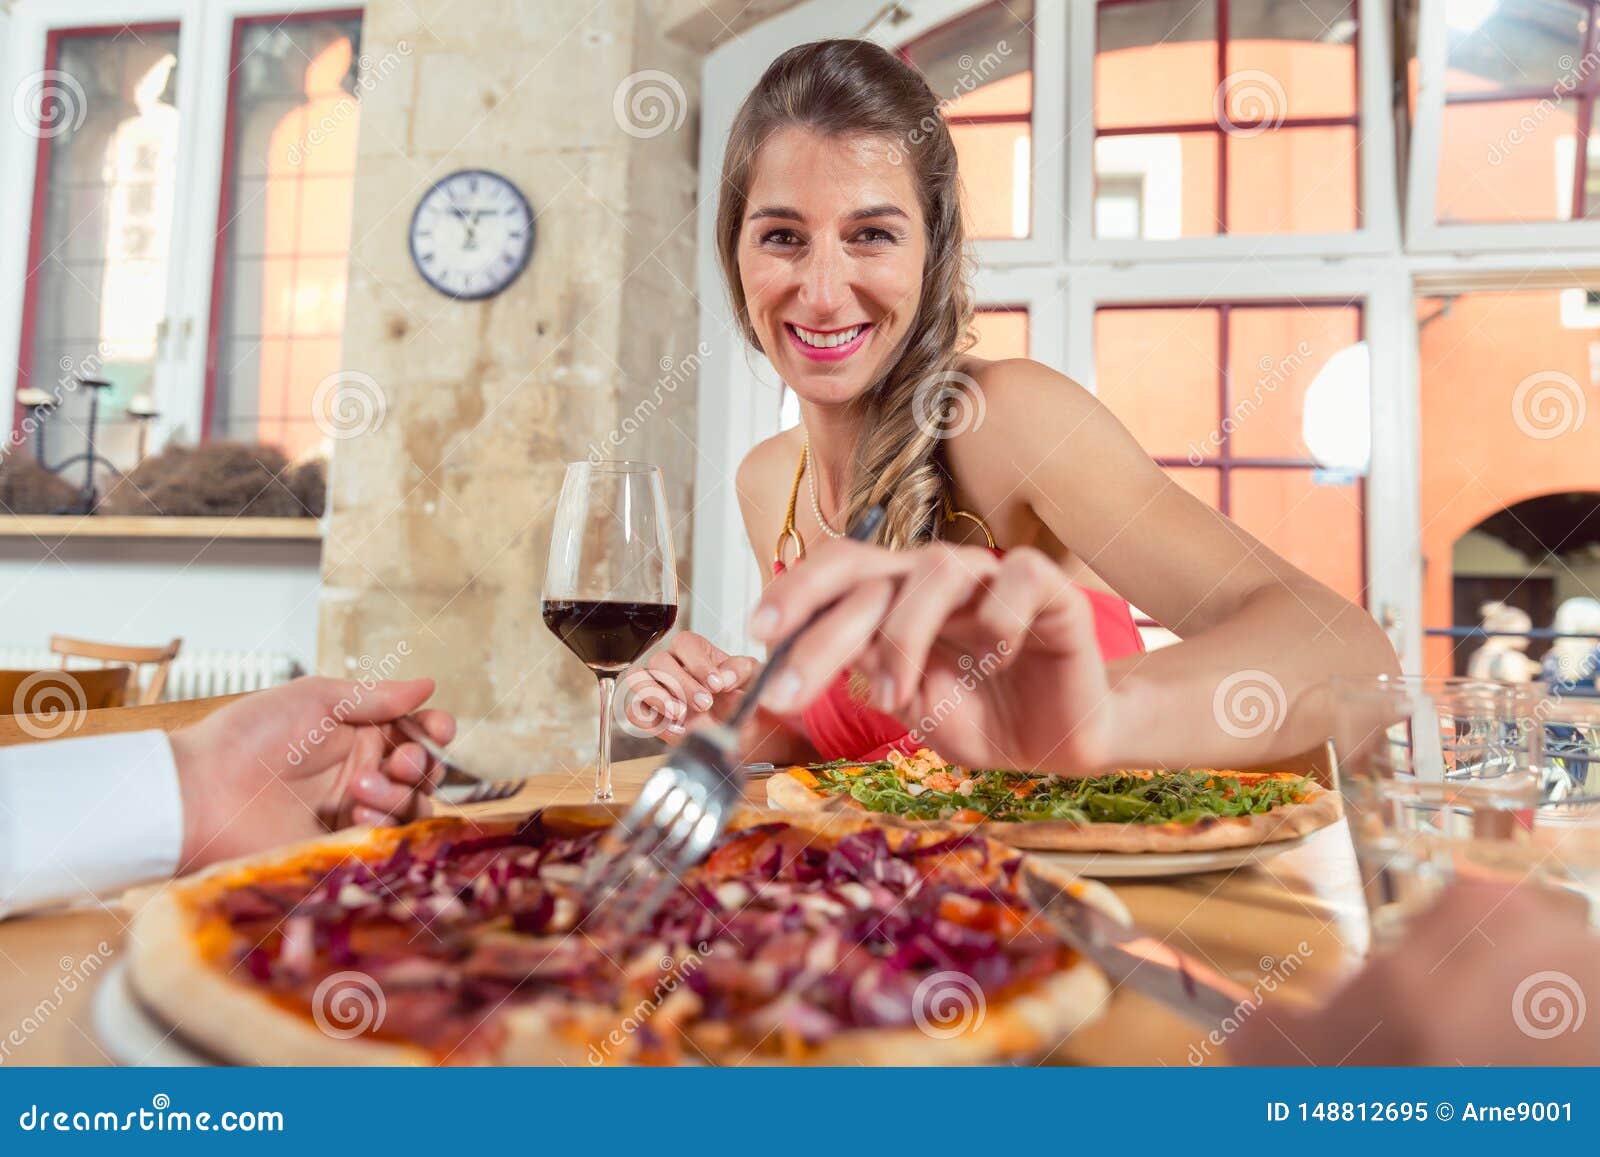 Woman Eating Pizza At Restaurant Stock Image Image Of Lifestyle